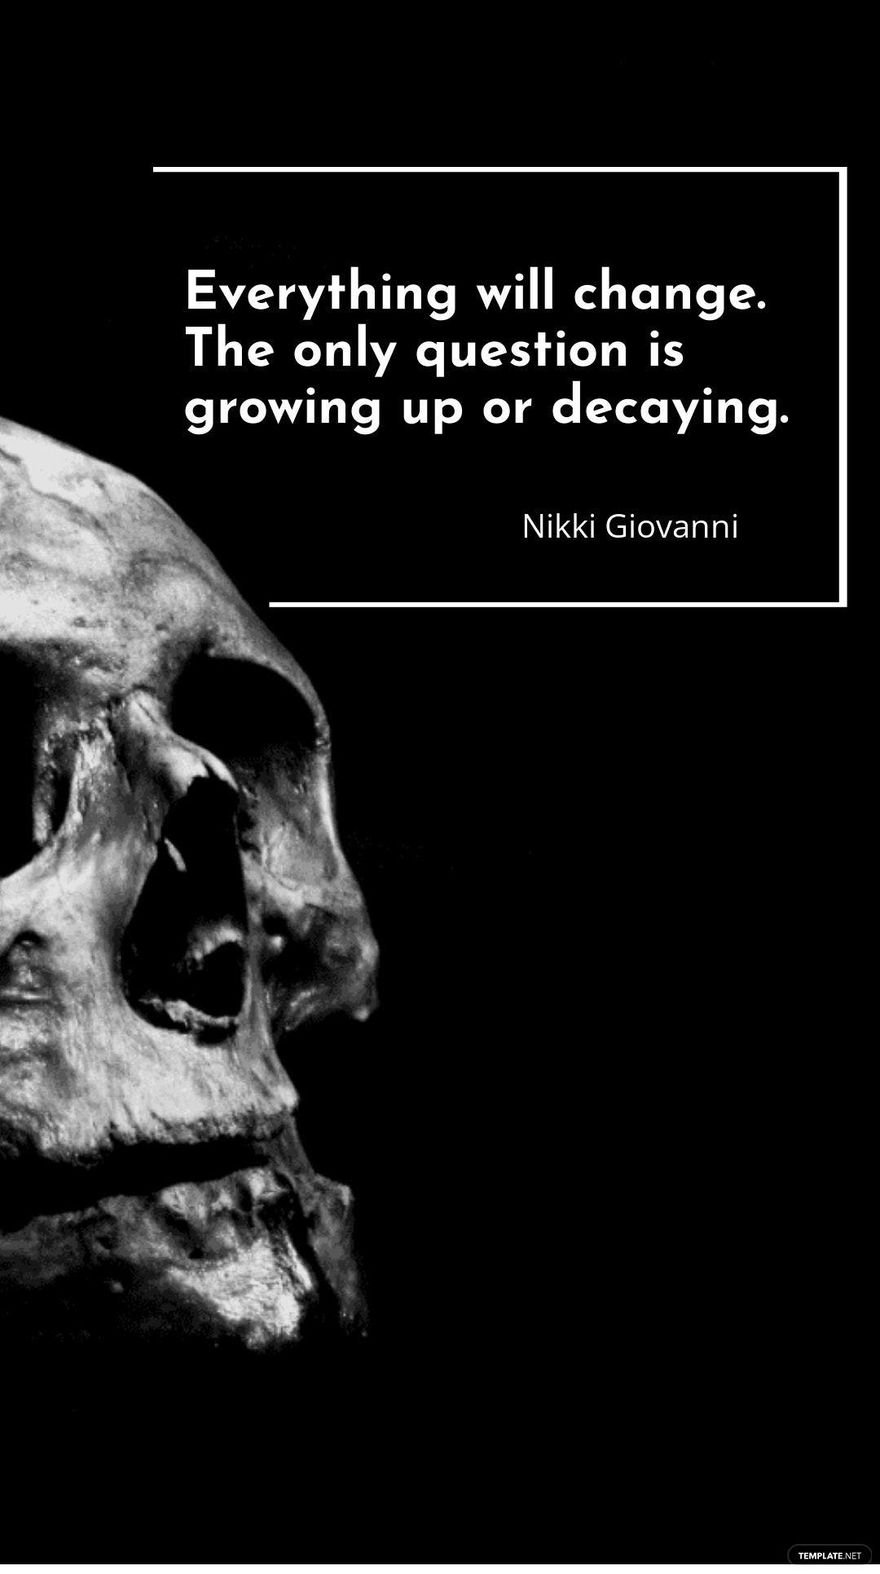 Nikki Giovanni - Everything will change. The only question is growing up or decaying.